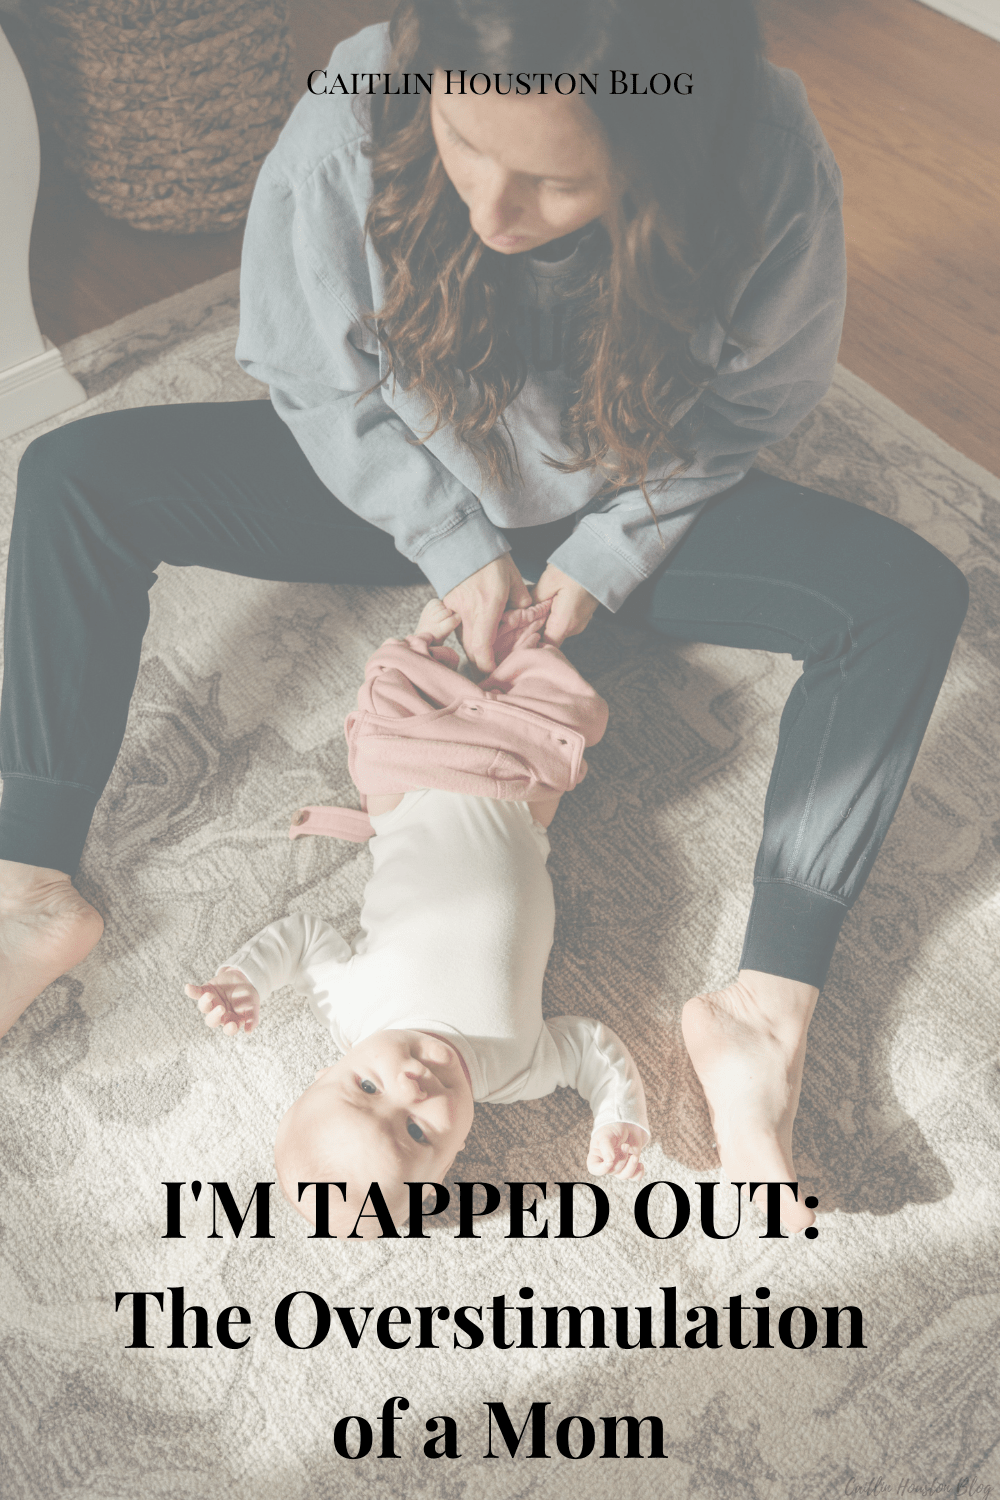 I’m Tapped Out: The Overstimulation of a Mom